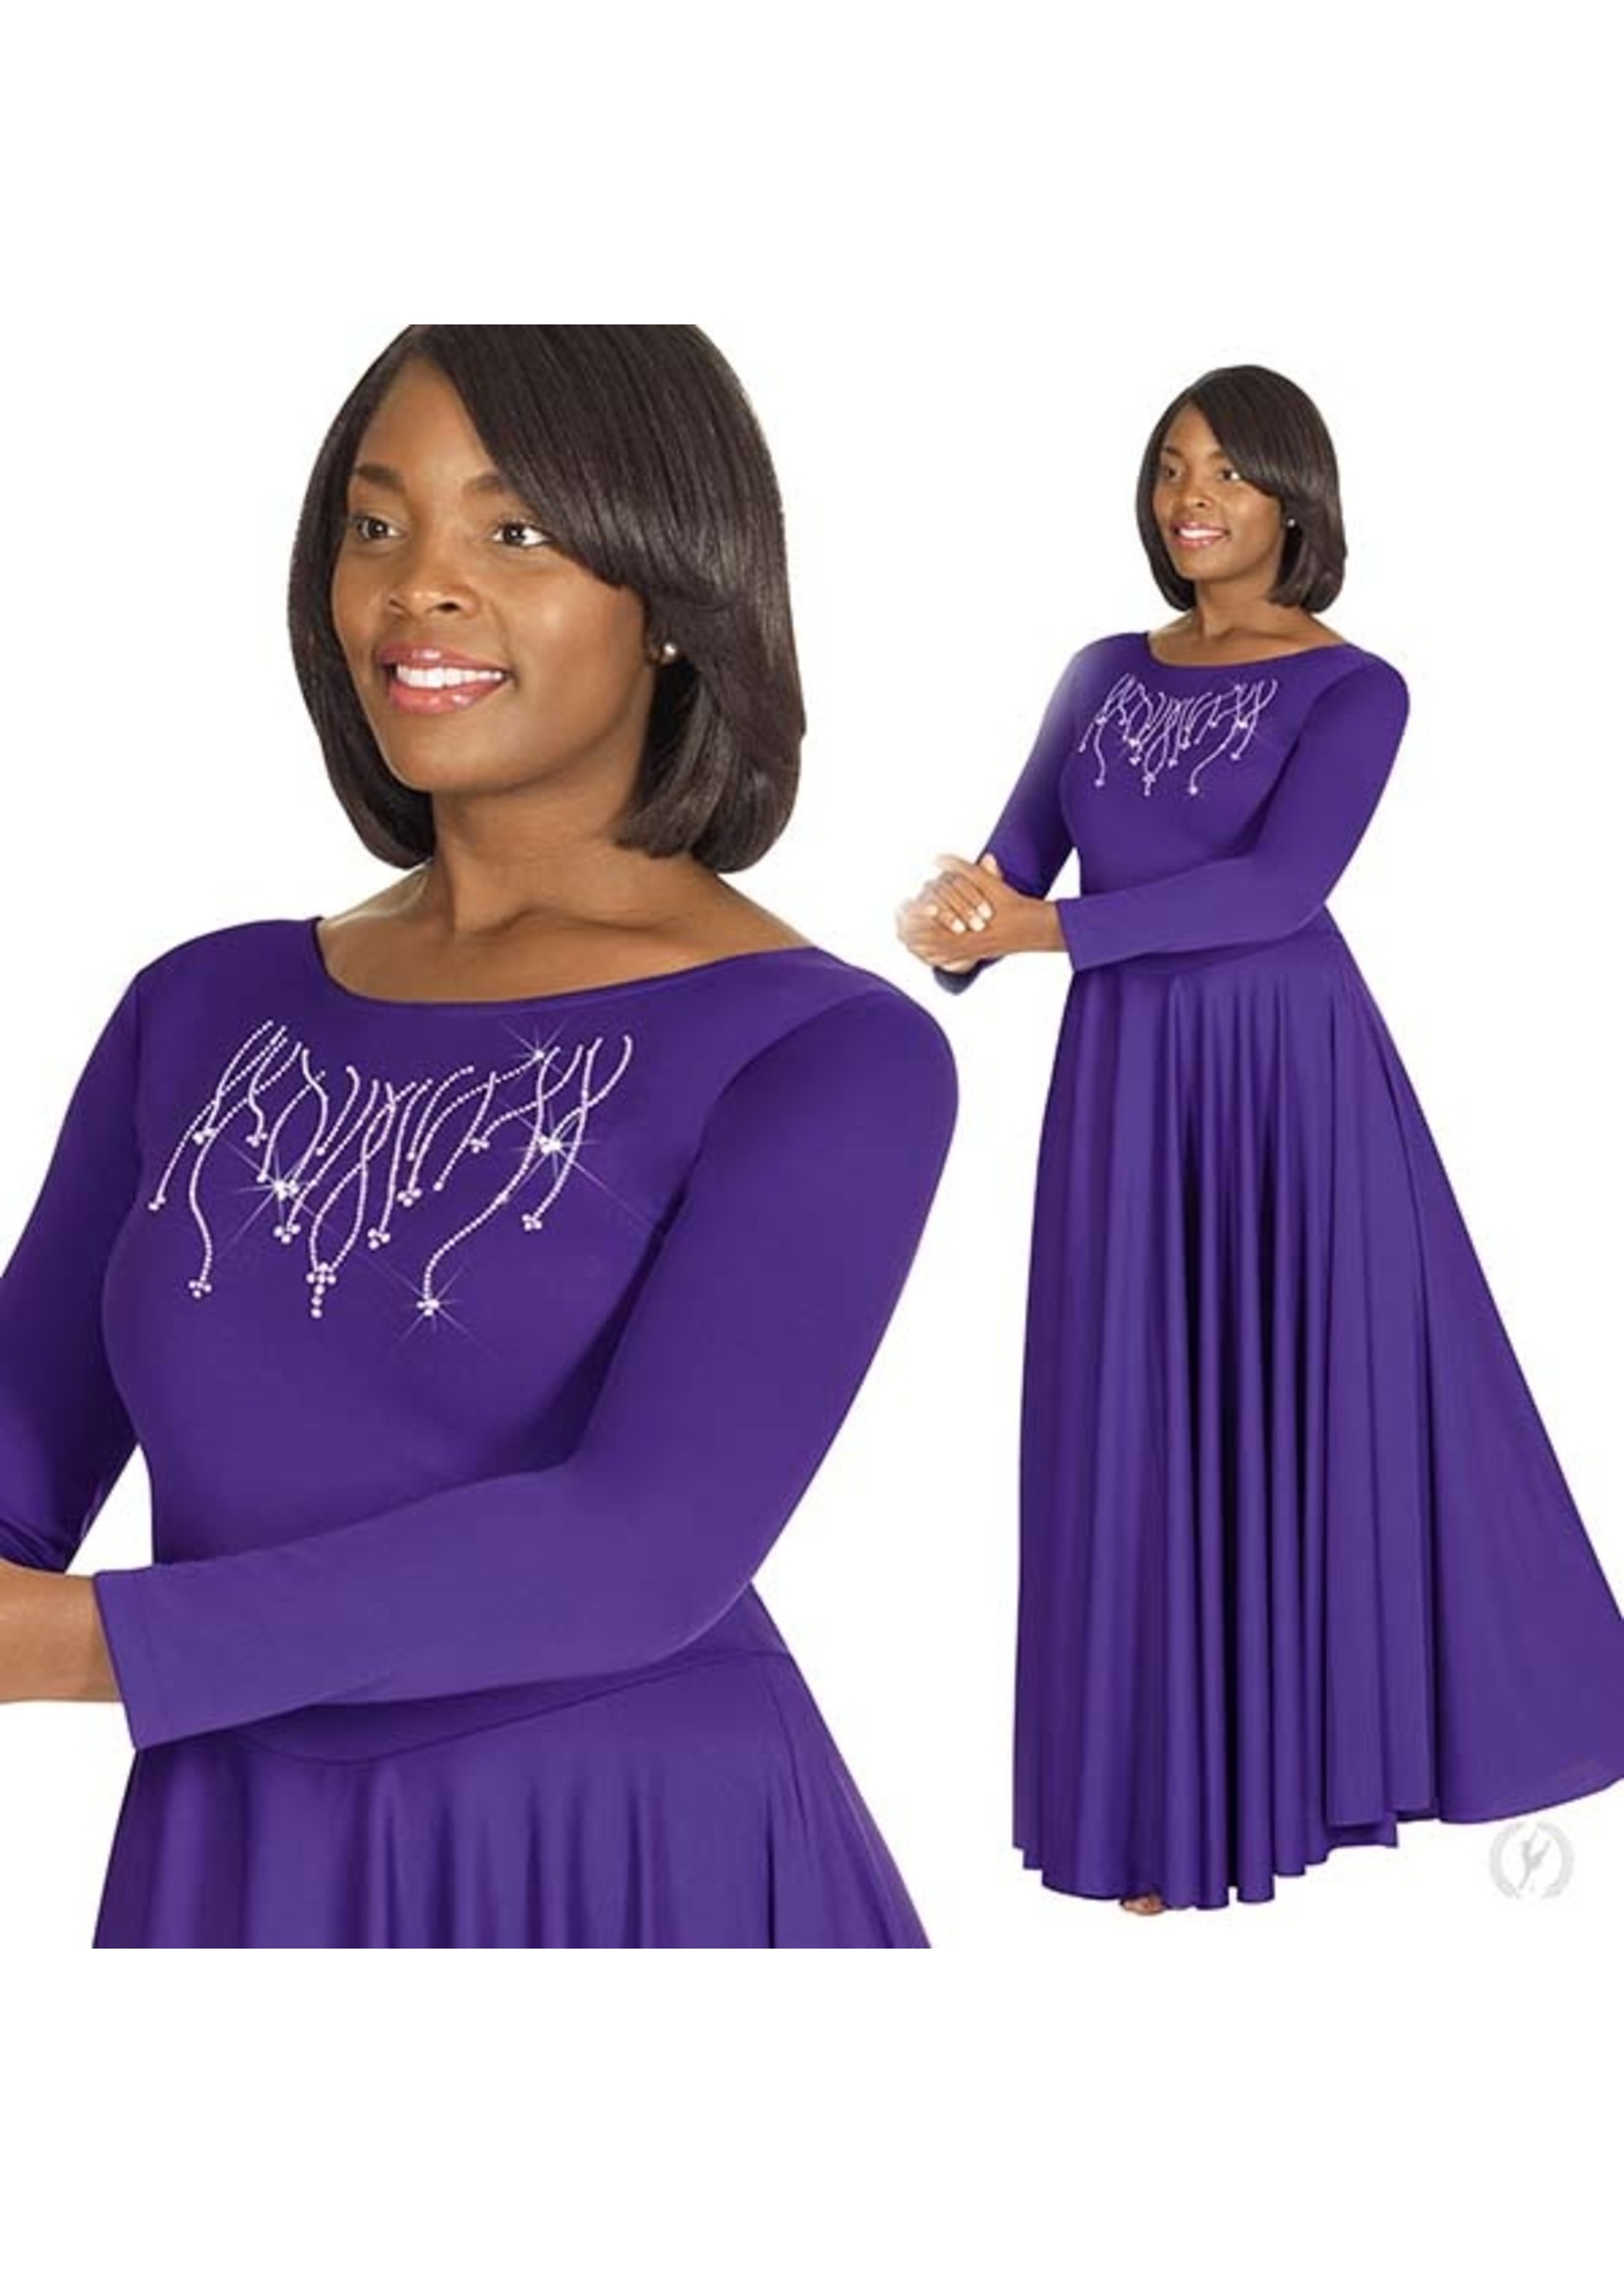 Front Lined Long Sleeve Dress with Rhinestone Reigning Cross Dress